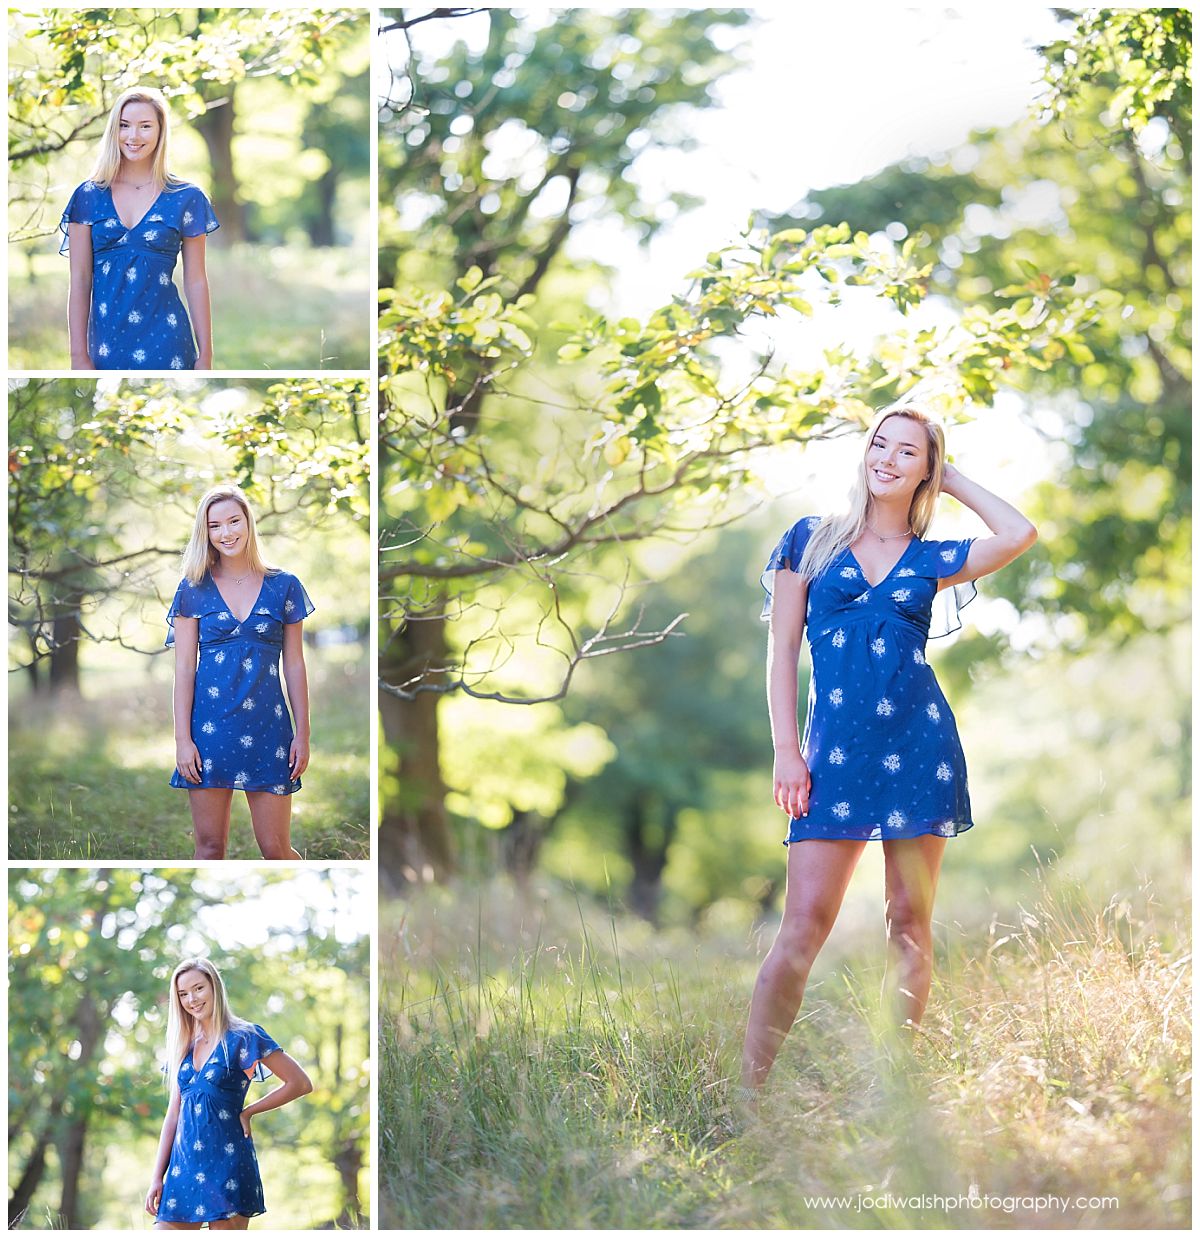 images of a senior girl portrait session with Jodi Walsh Photography at North Park in Pittsburgh. The senior girl is wearing a short blue dress with white flowers and is standing in an area of tall grass.